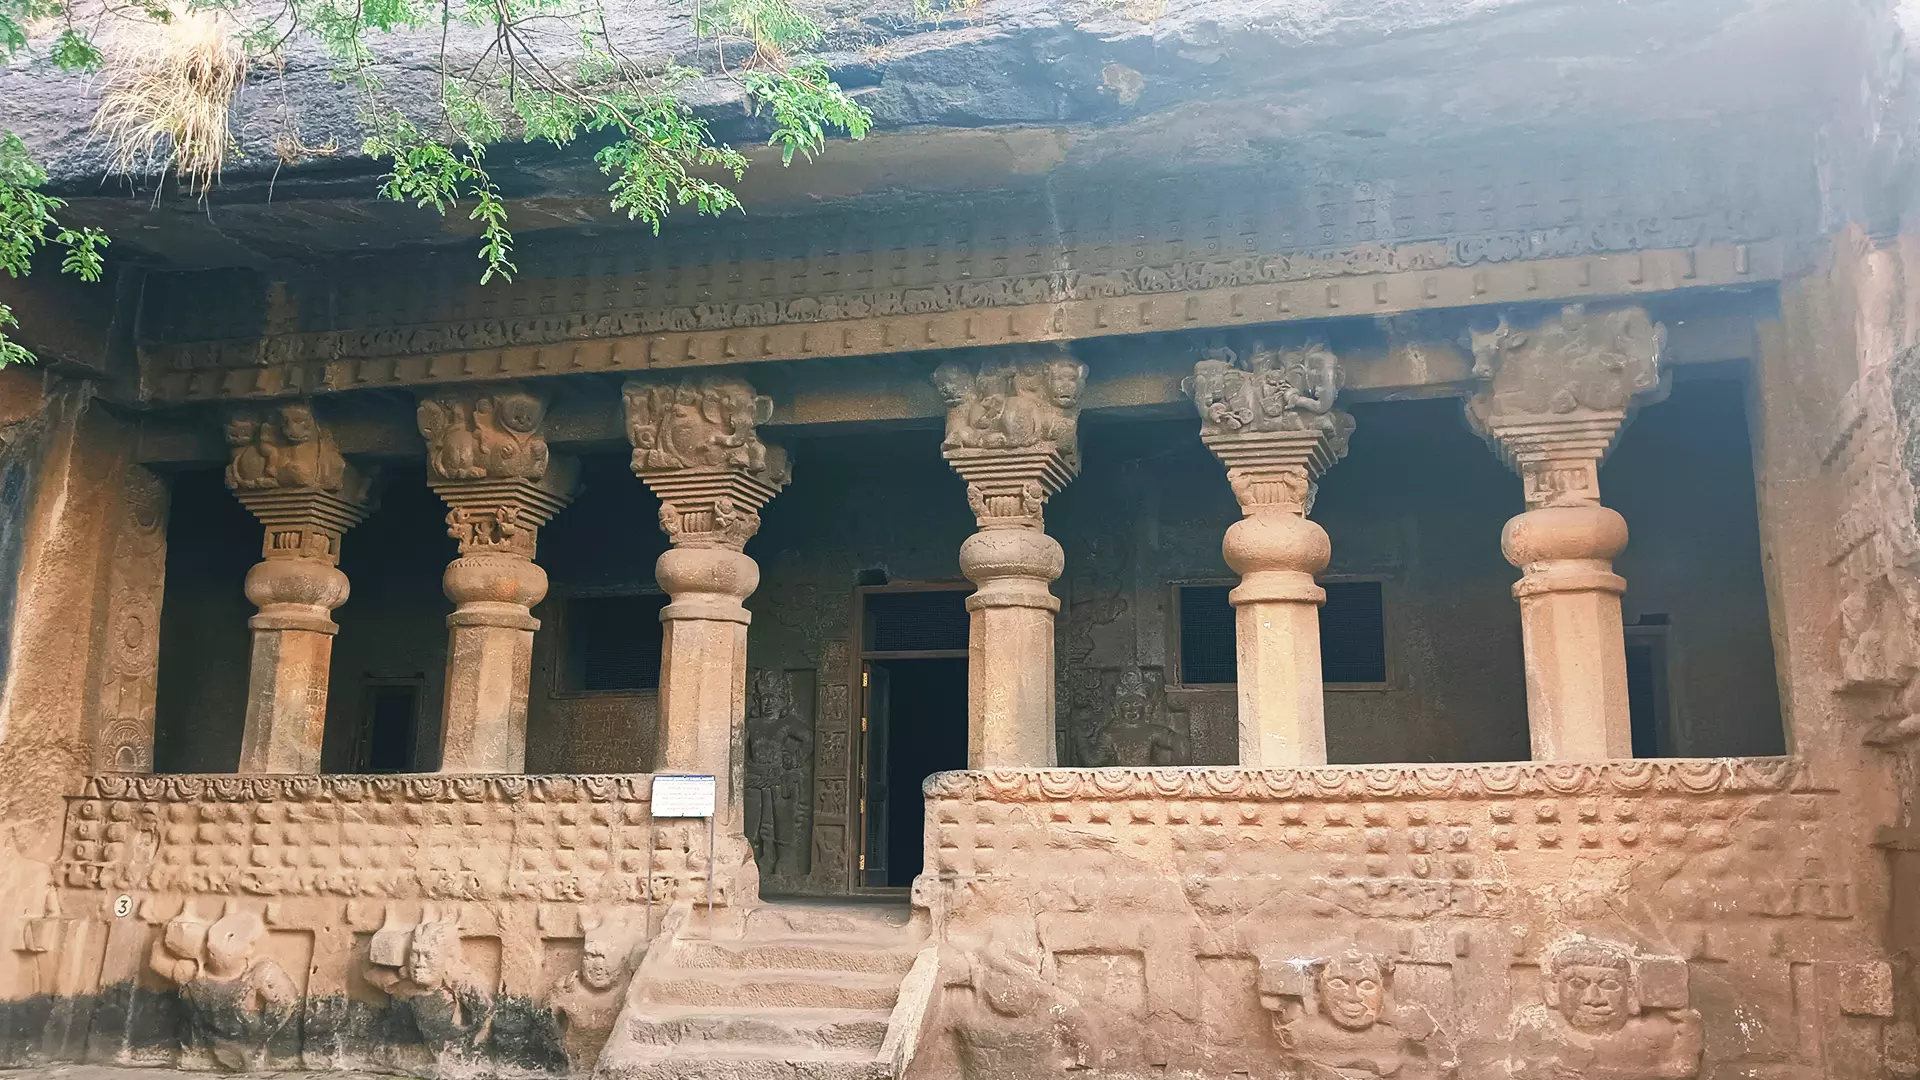 The group of 25 caves, locally known as Pandav Lena, were cut in a long line on the north face of the Trirashmi hill. 